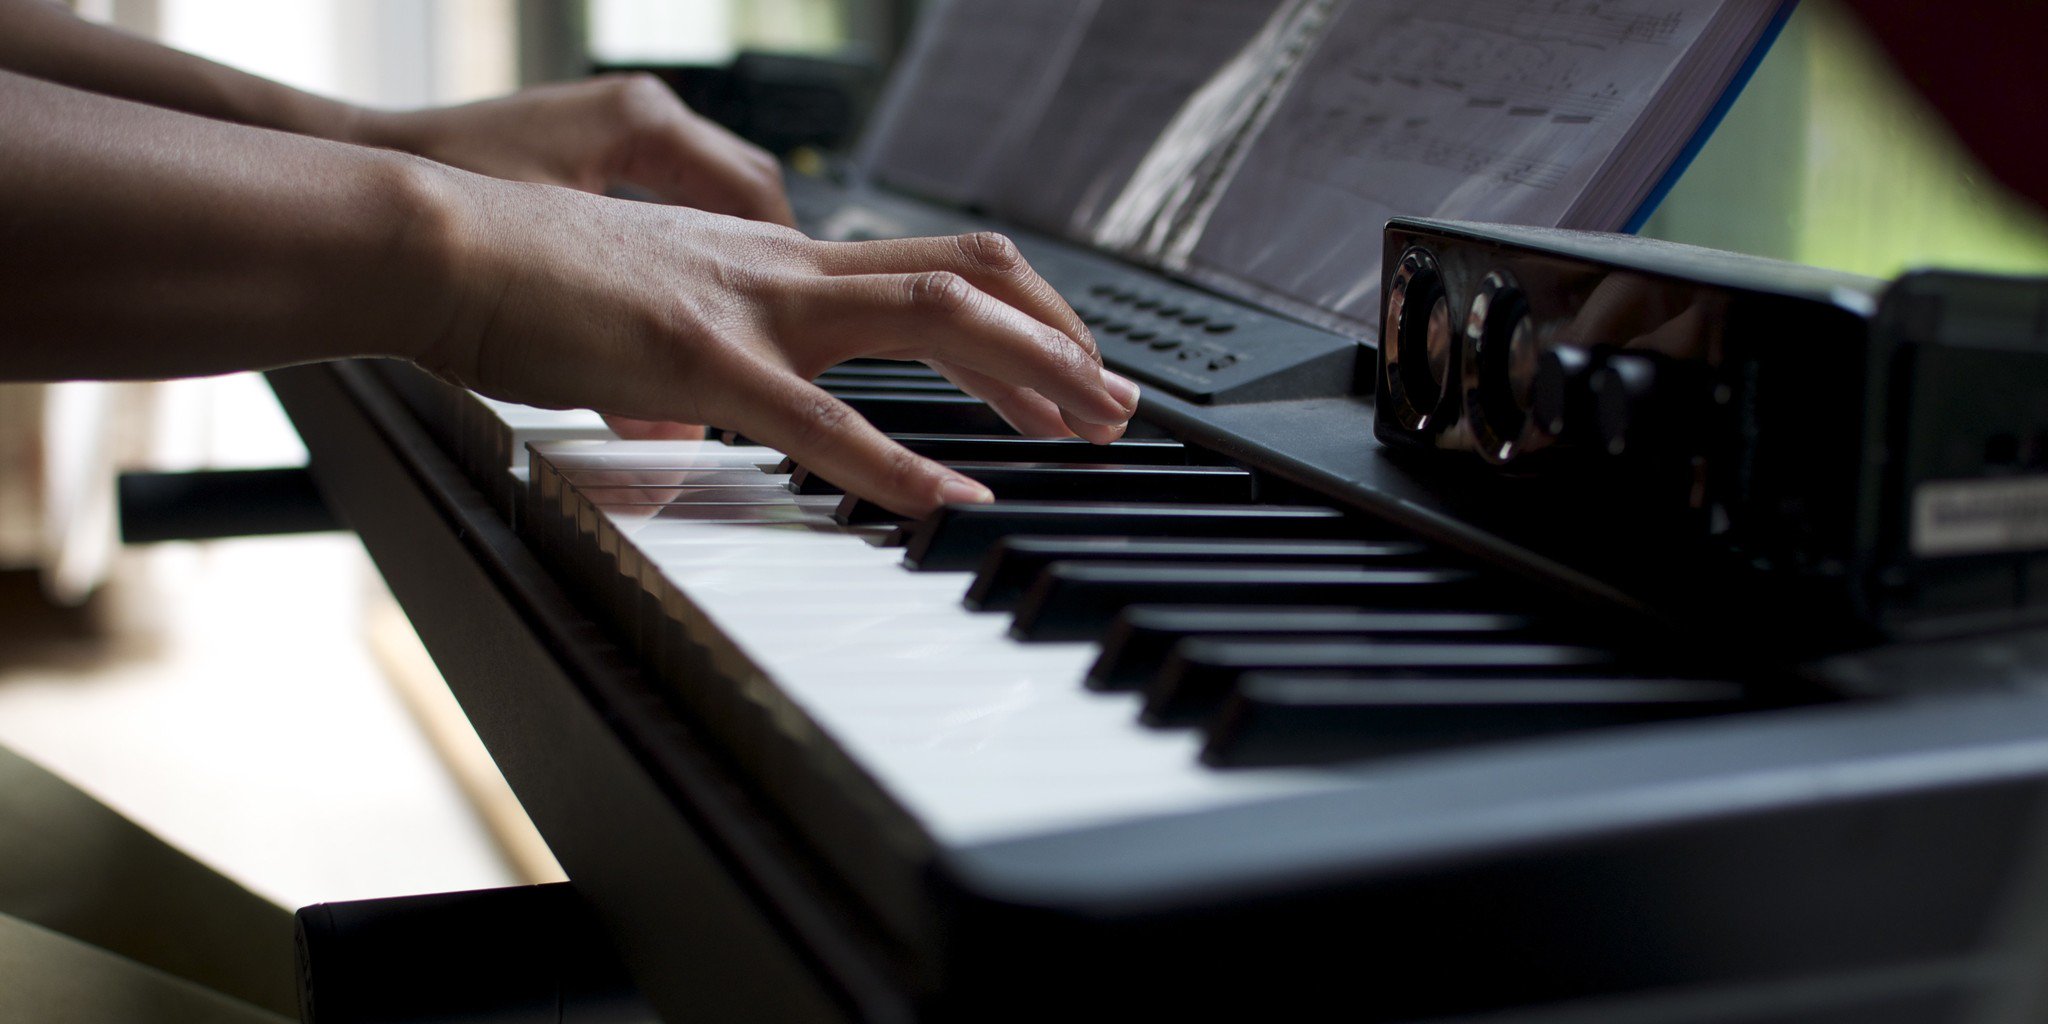 Man Who Lied About Playing Piano on Résumé Asked to Perform at Work